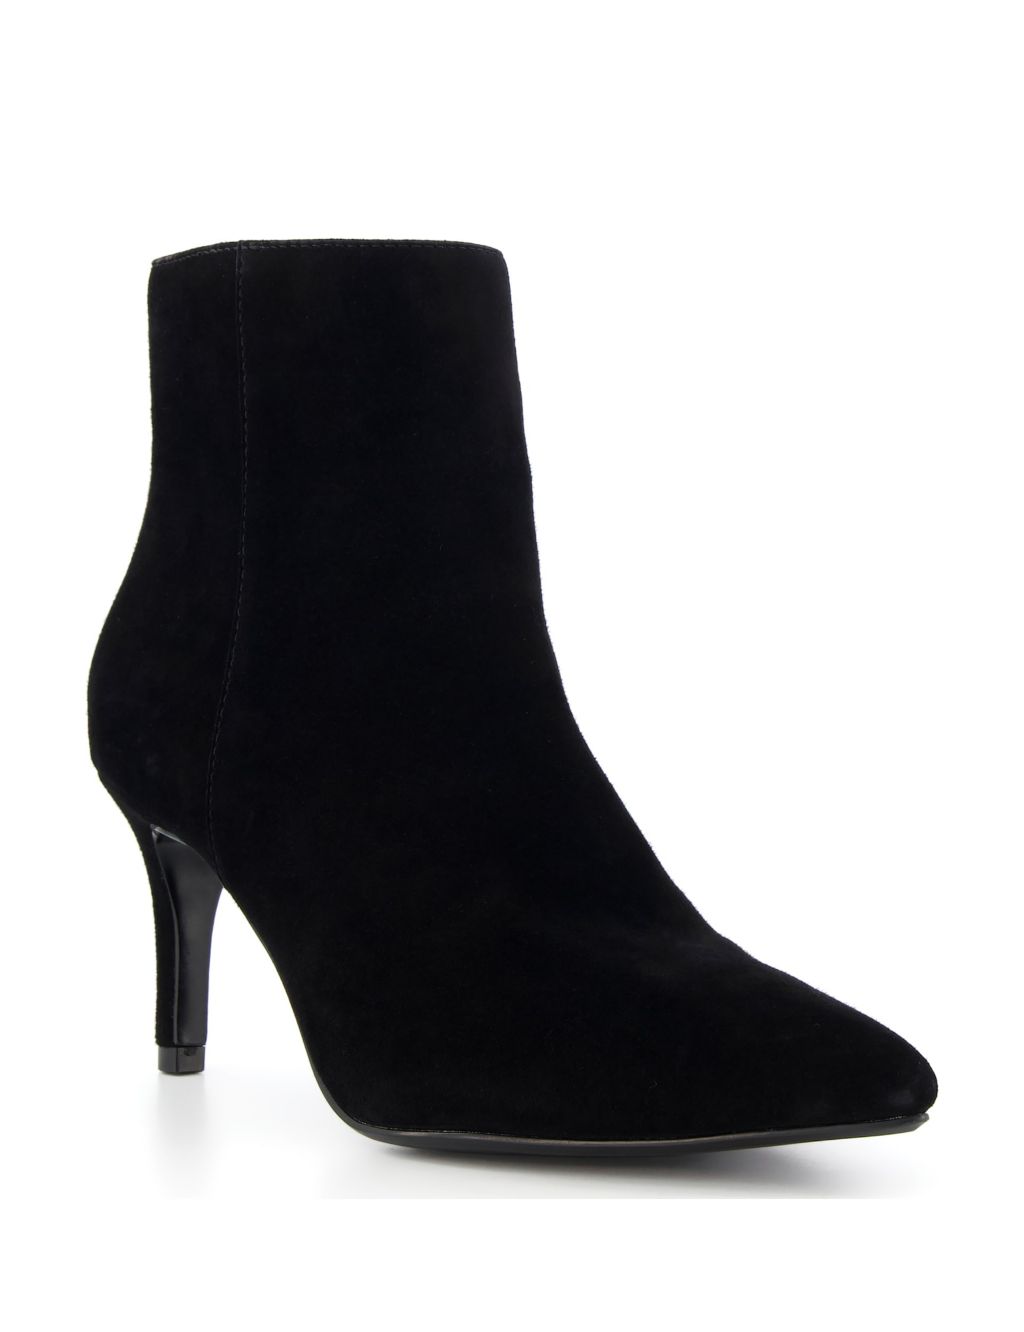 Suede Stiletto Heel Pointed Ankle Boots 1 of 4